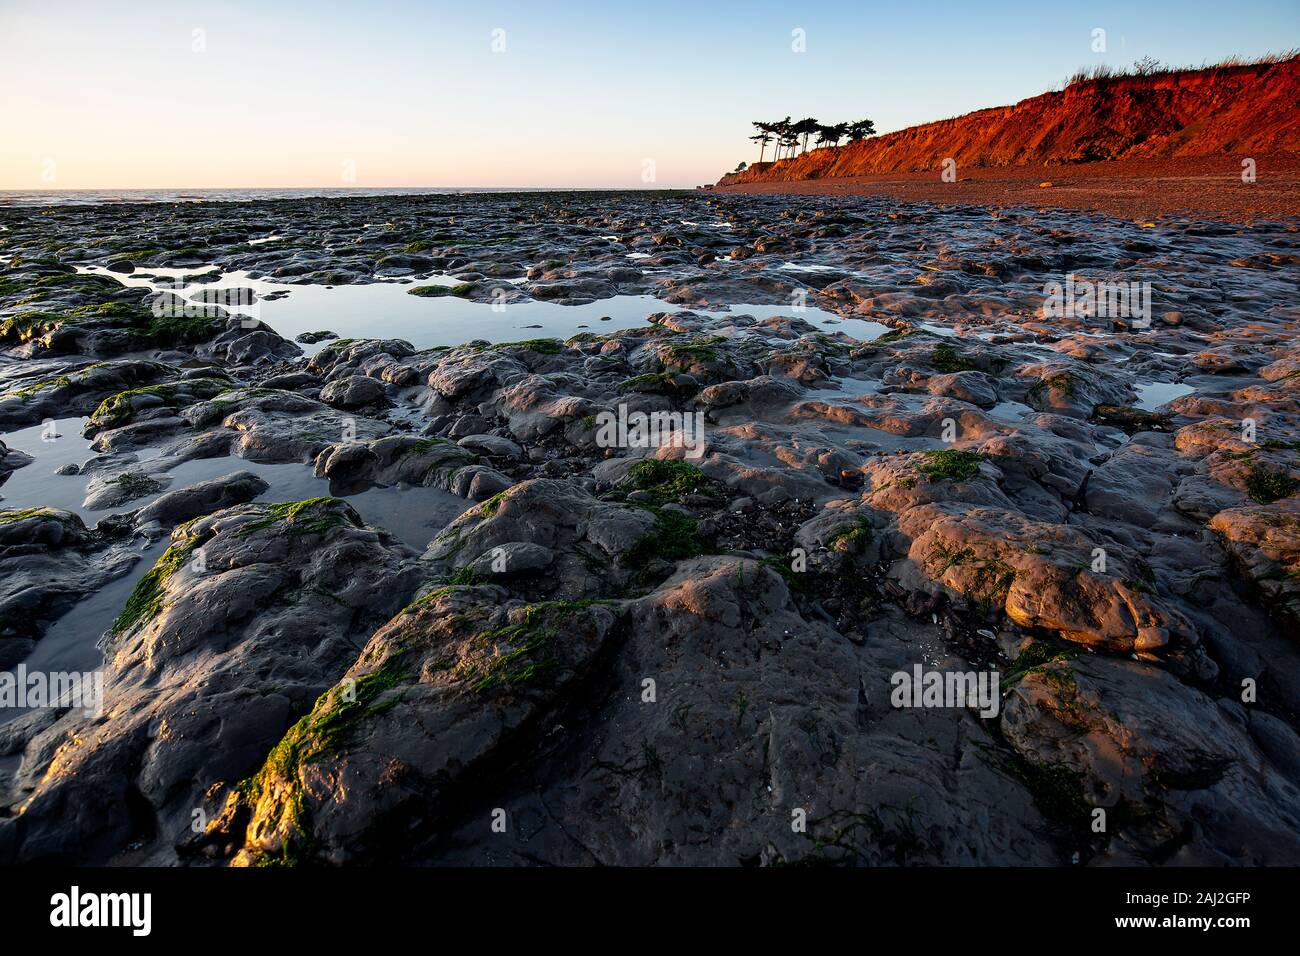 Beach and cliffs at low tide, Bawdsey, Suffolk Stock Photo